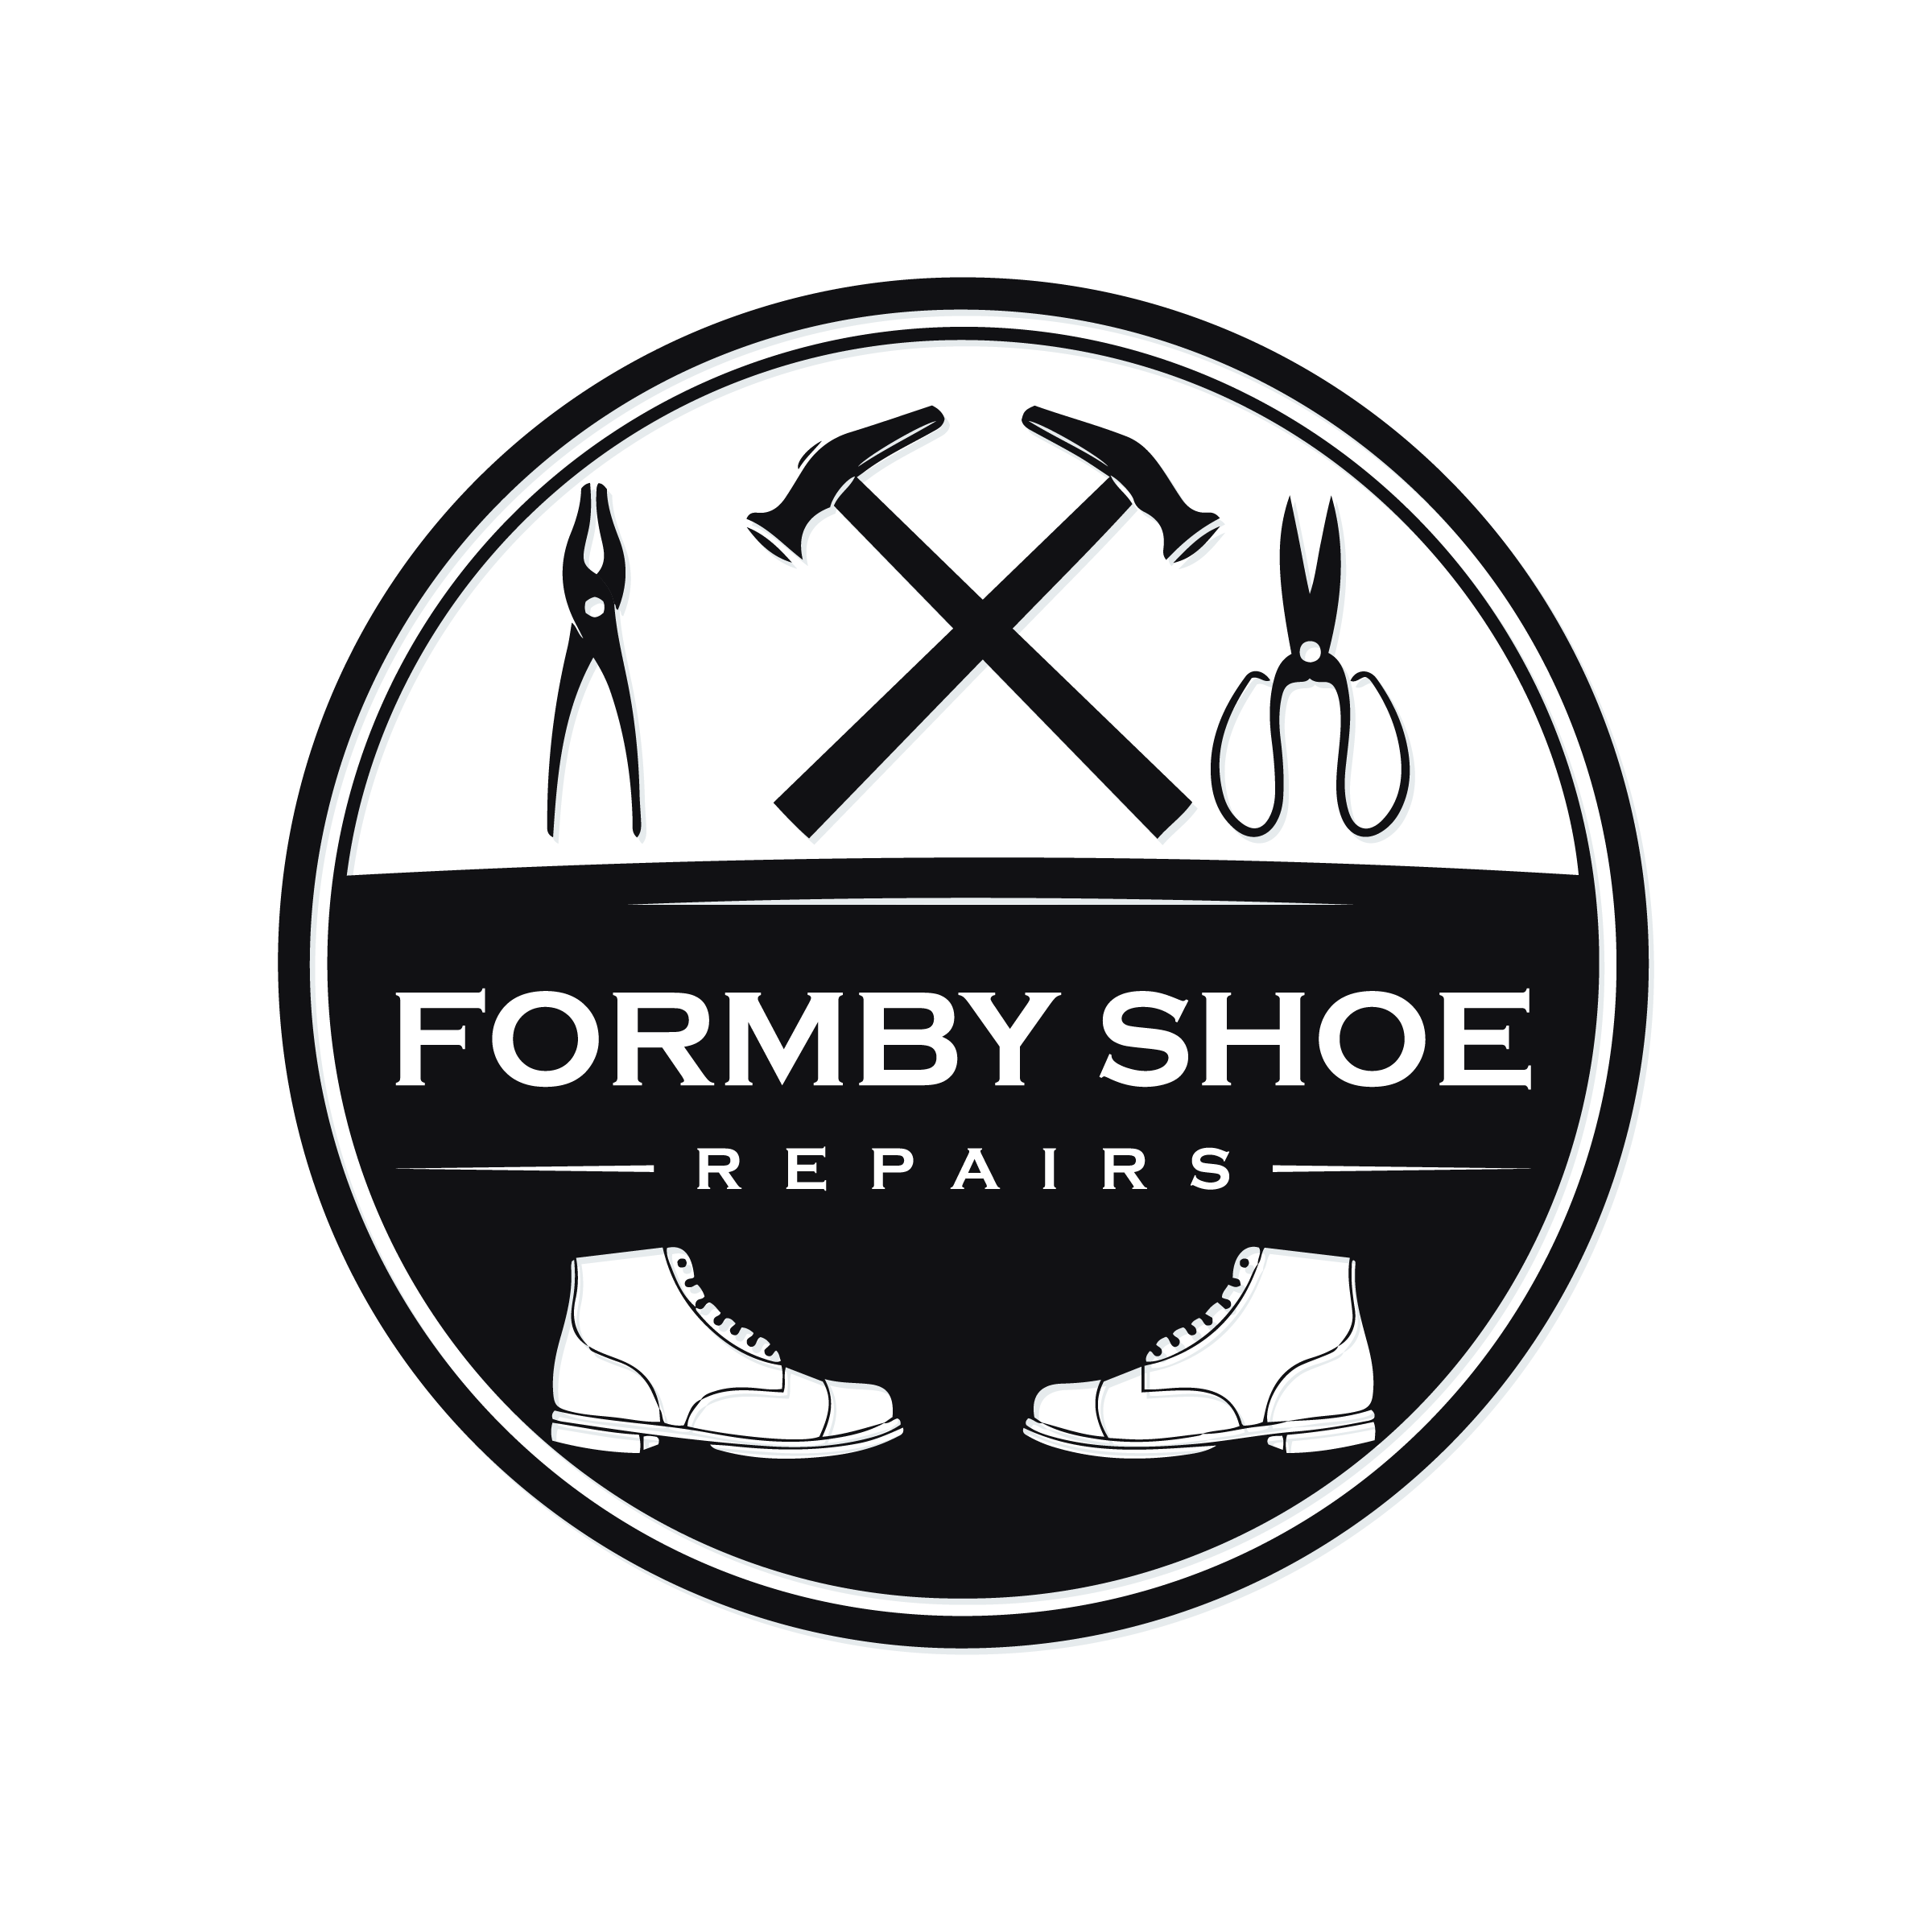 Contact - Formby Shoe Repairs | Quality Repairs, Key Cutting, Watch Repairs